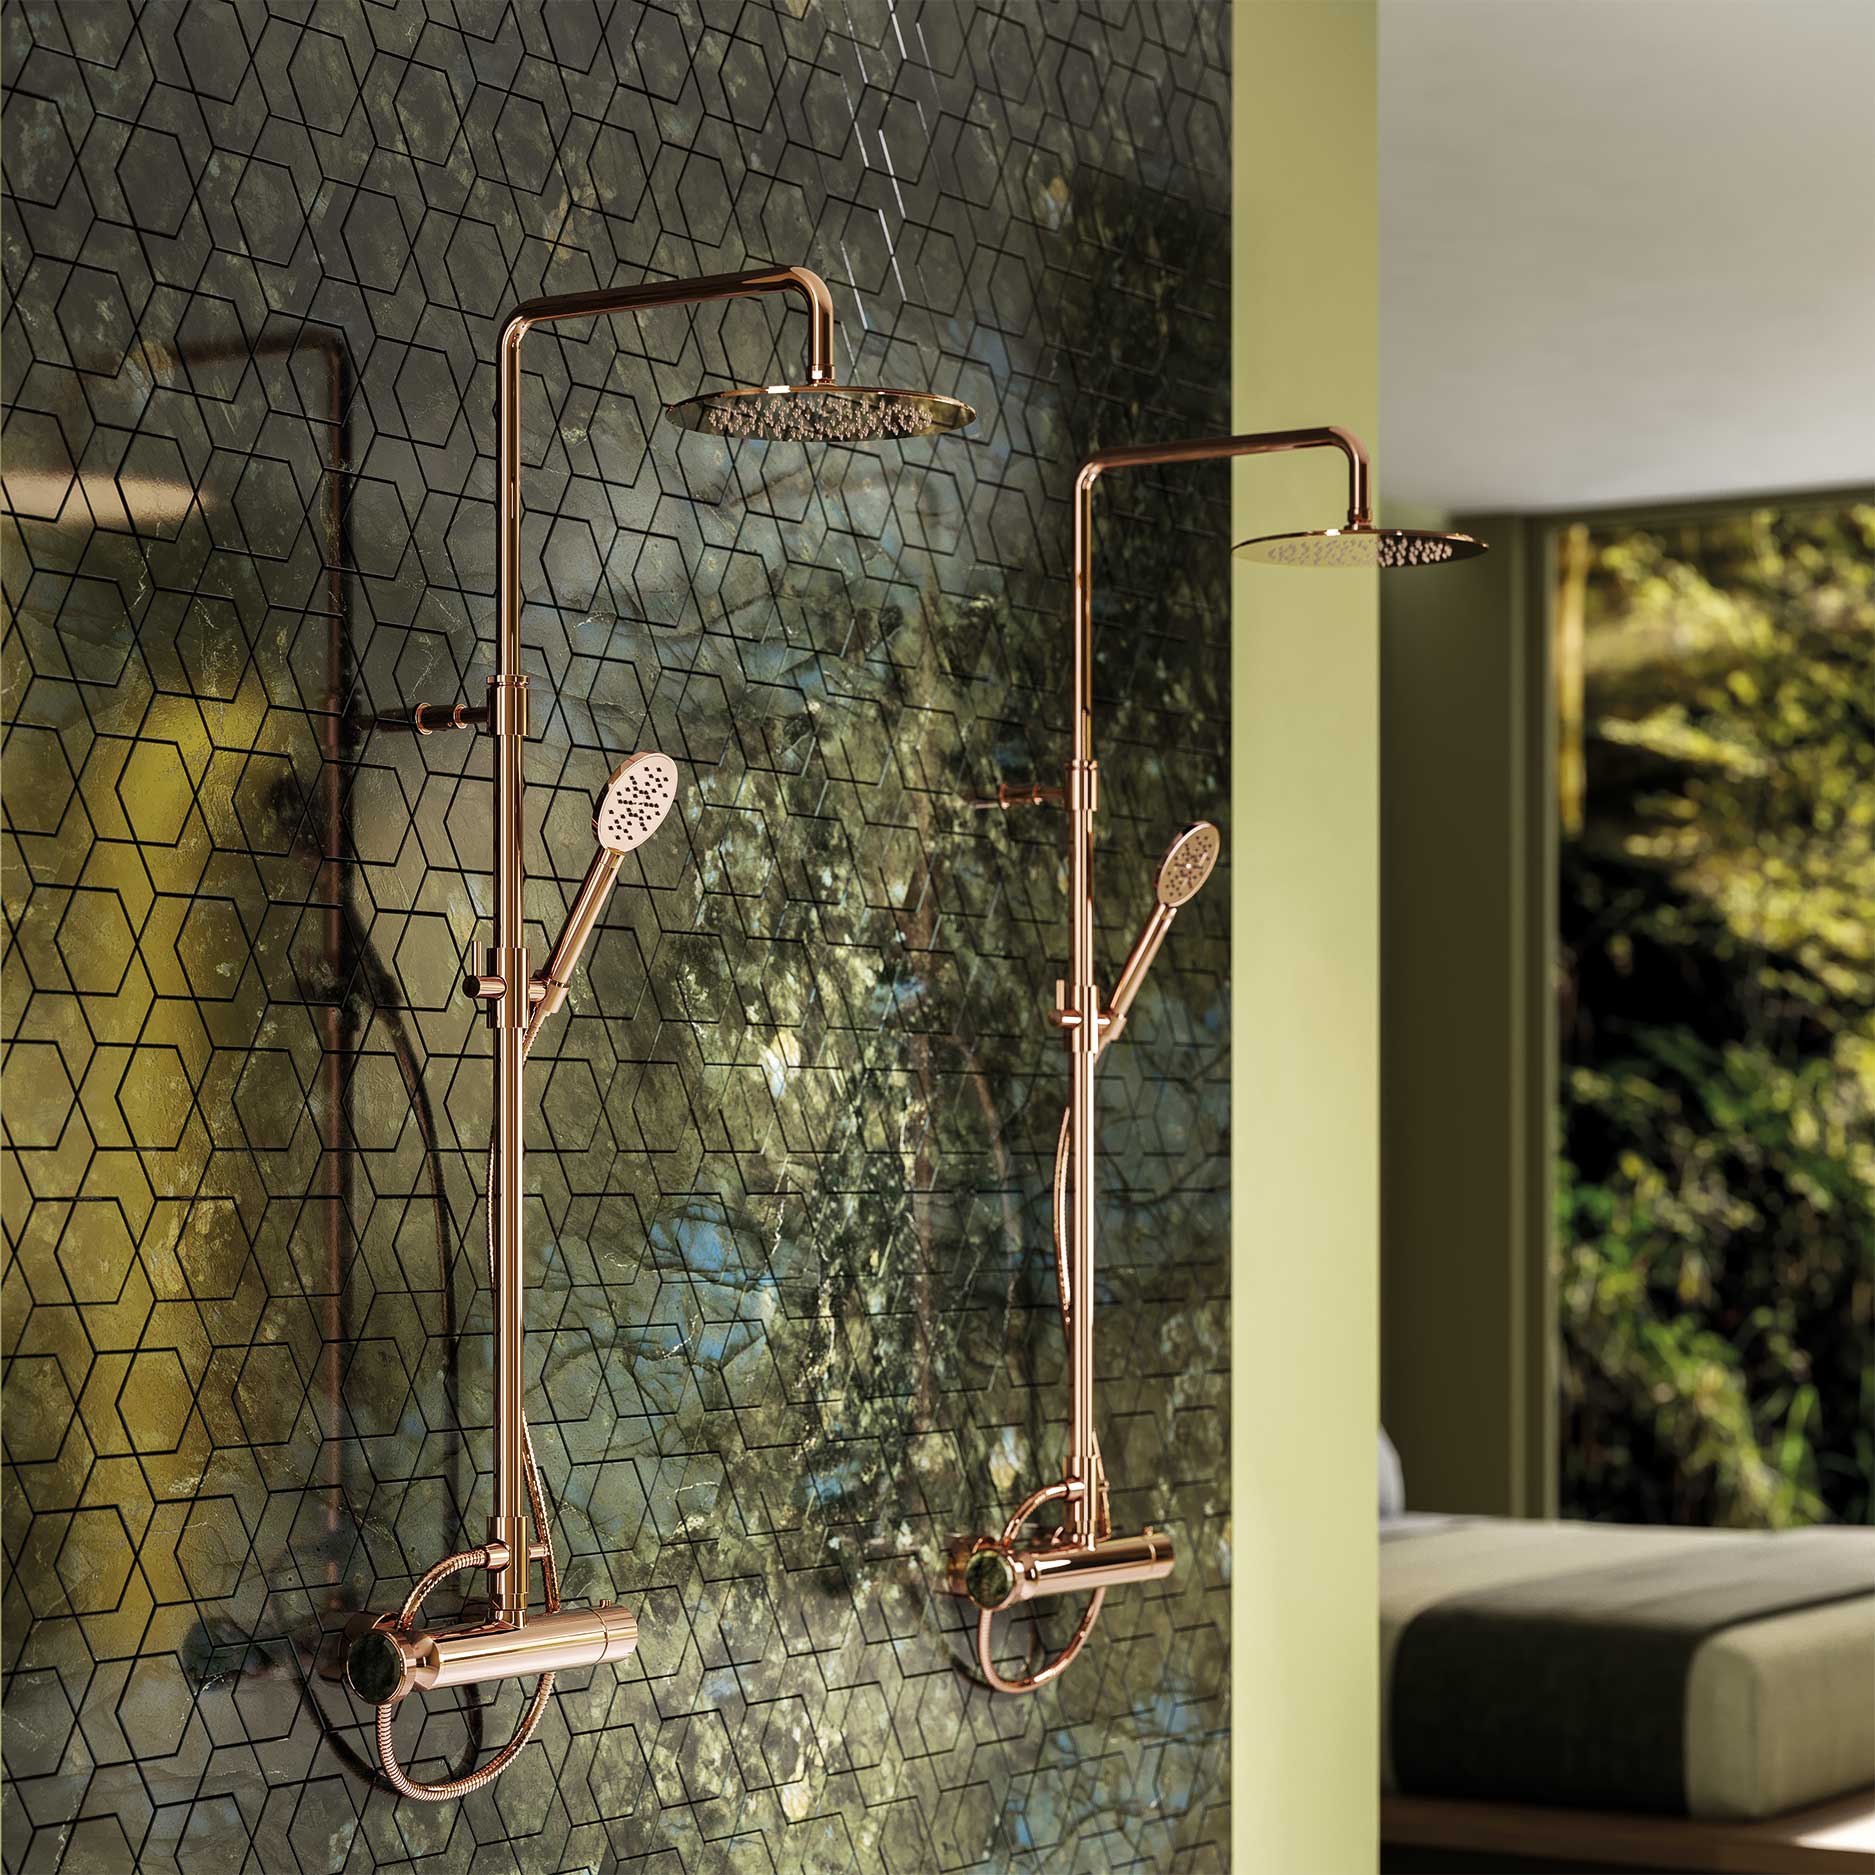 Exquisite Jörger and Fittings – Bathroom Accessories - Avant-garde & Luxury shine glamorous with moments